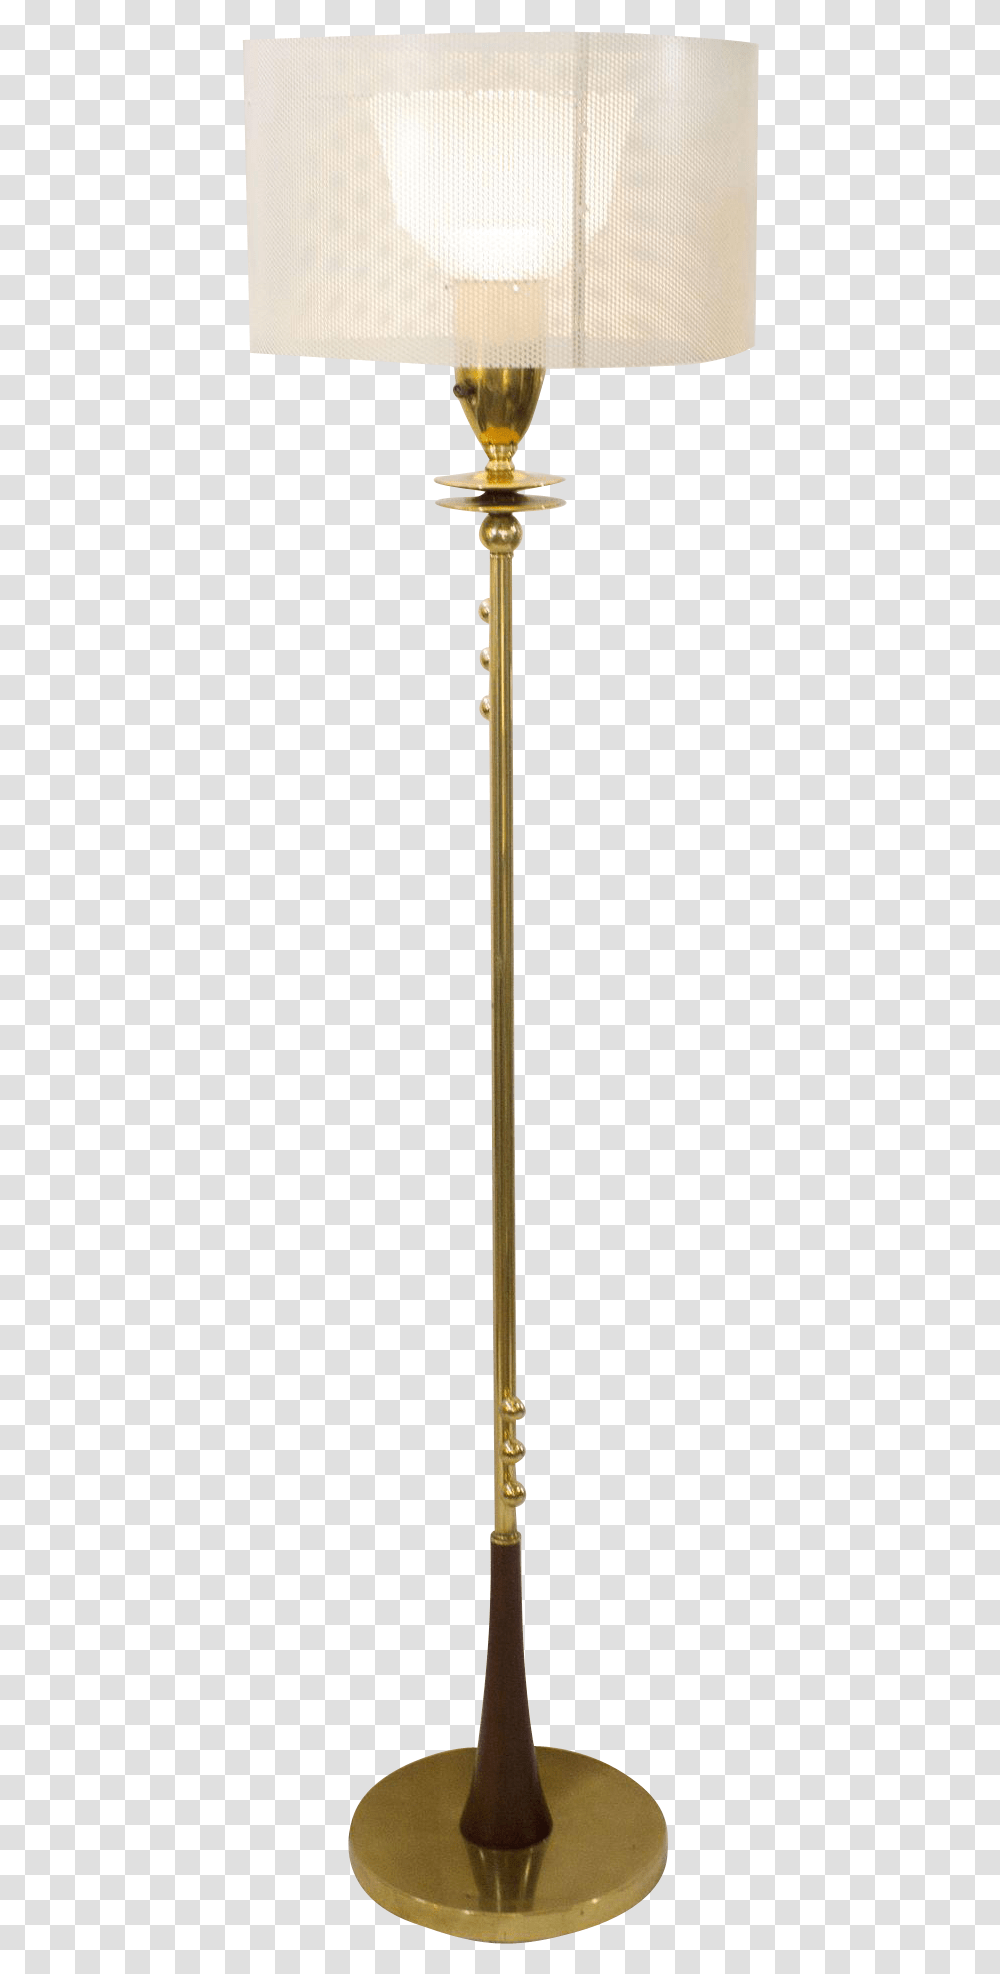 Mcentury Modern Modernism Floor Lamp With Perforated Lamp Shade, Weapon, Weaponry, Emblem Transparent Png